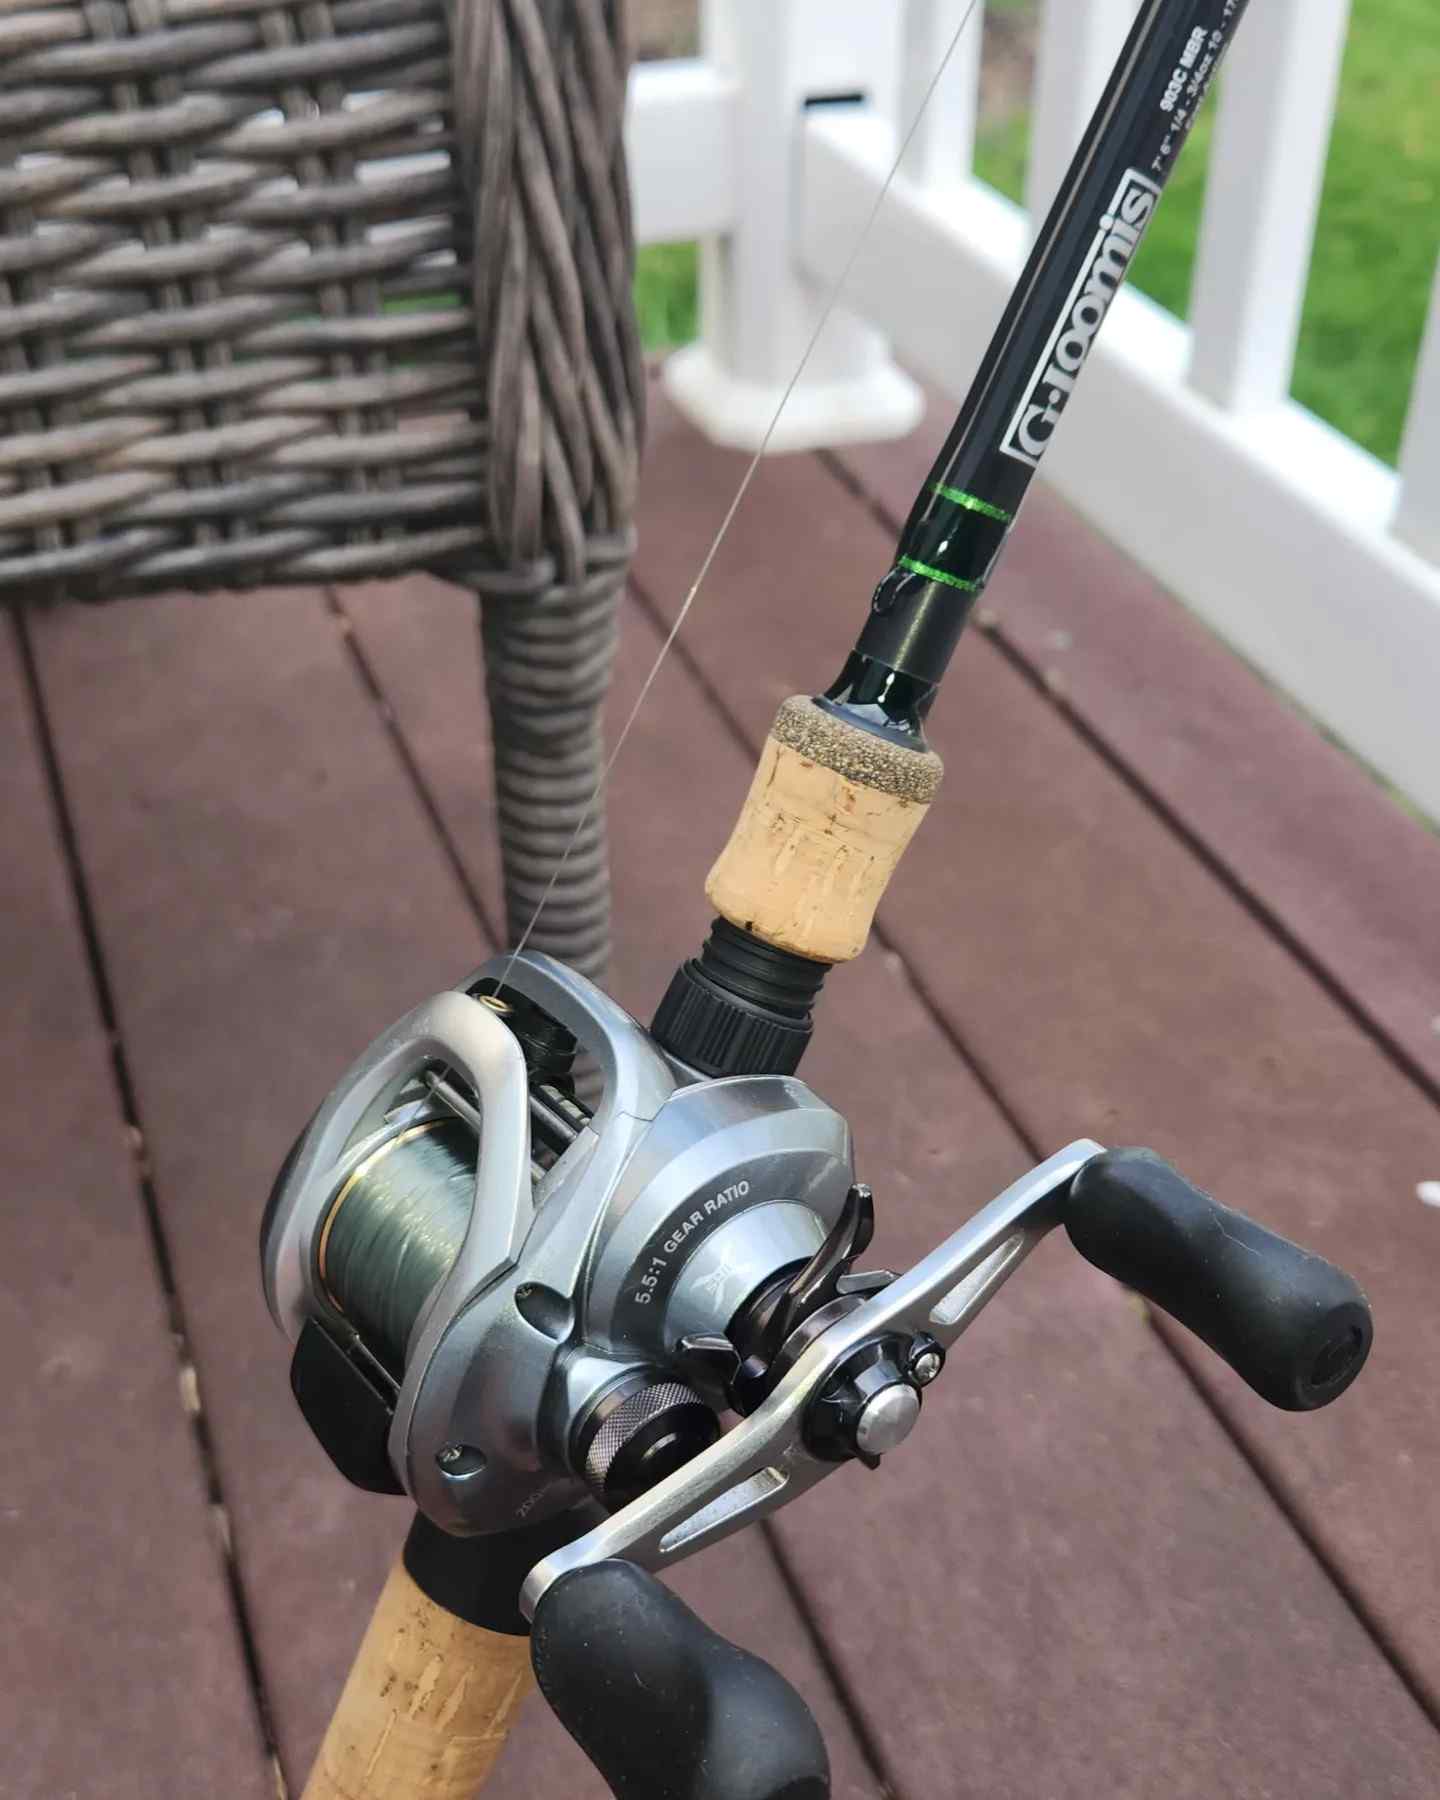 What is your fav setup? - Fishing Rods, Reels, Line, and Knots